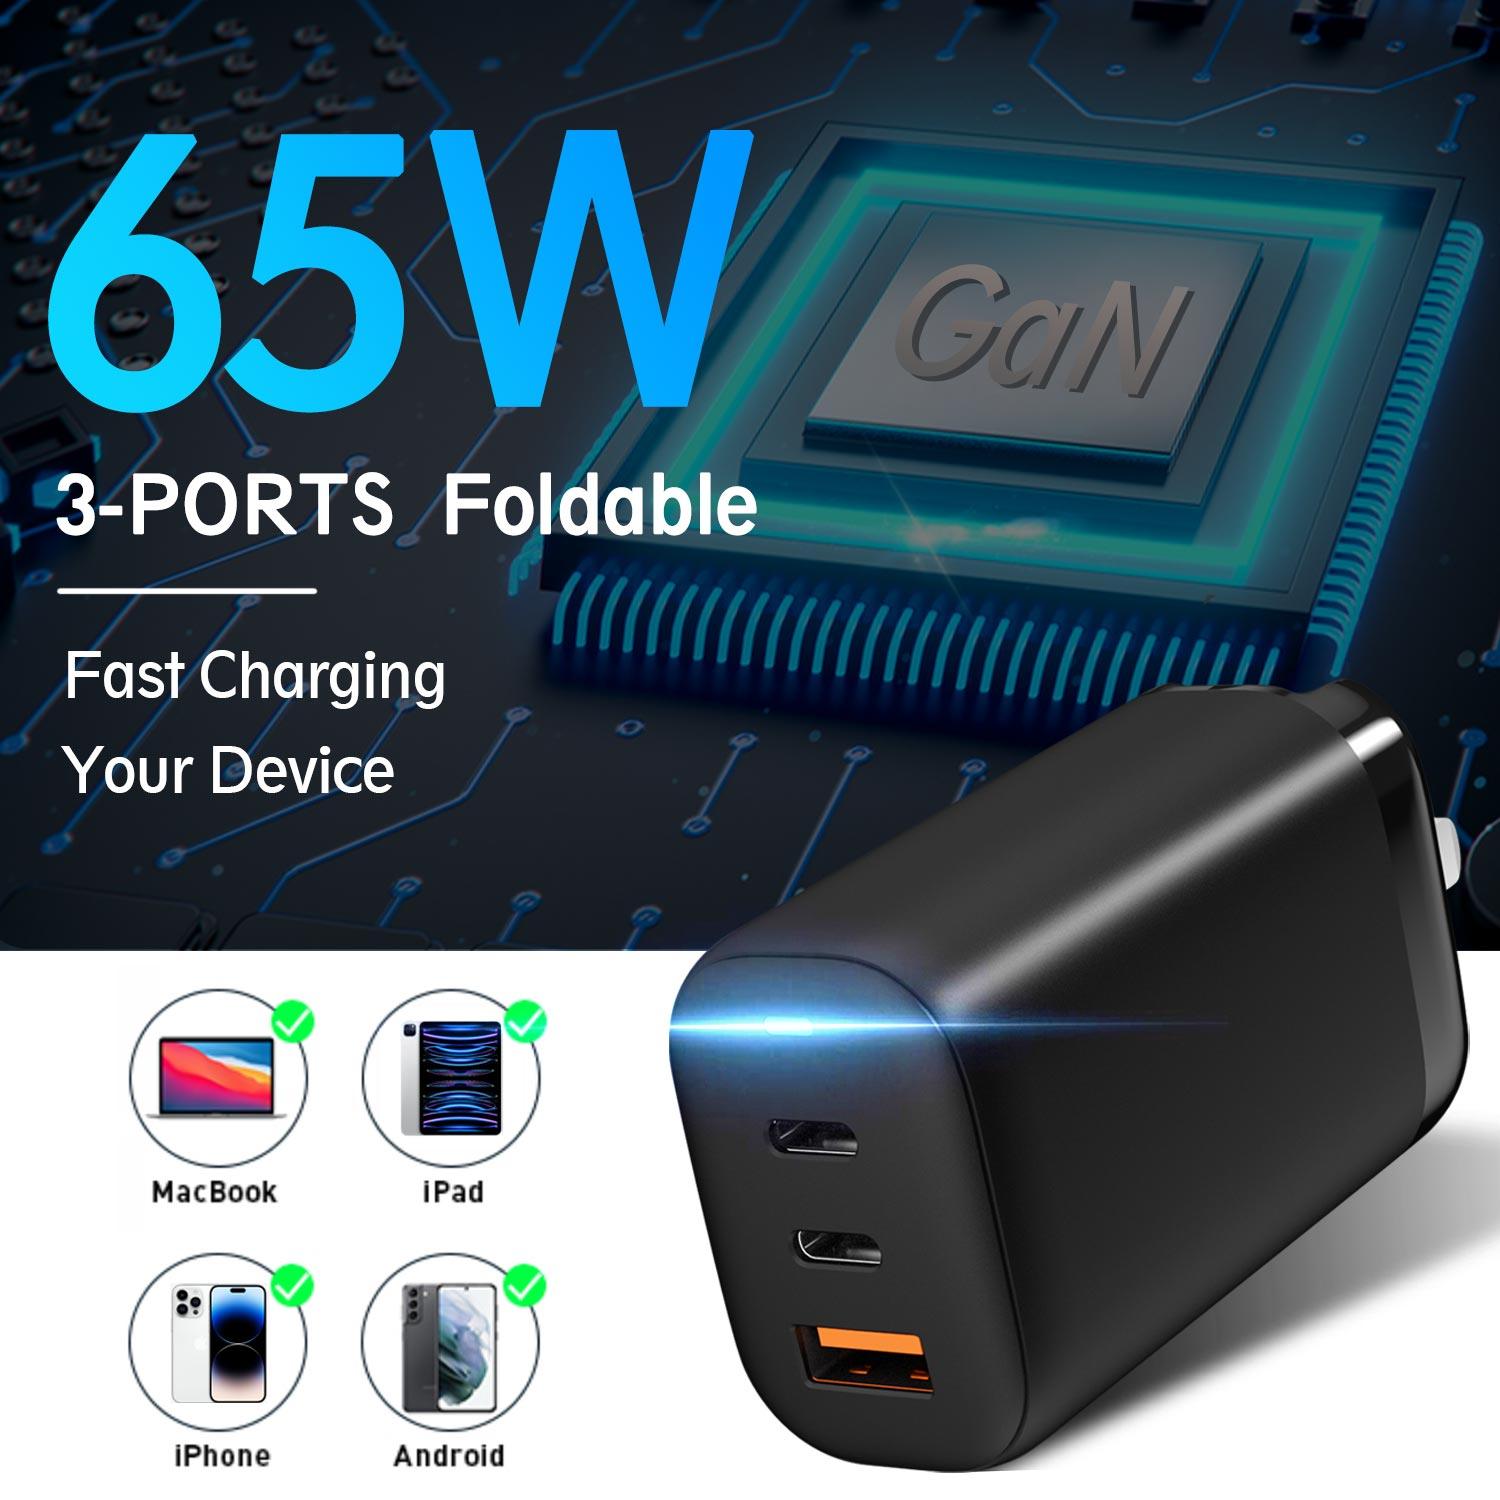 65W GaN Charger with 3 Ports - Magfit